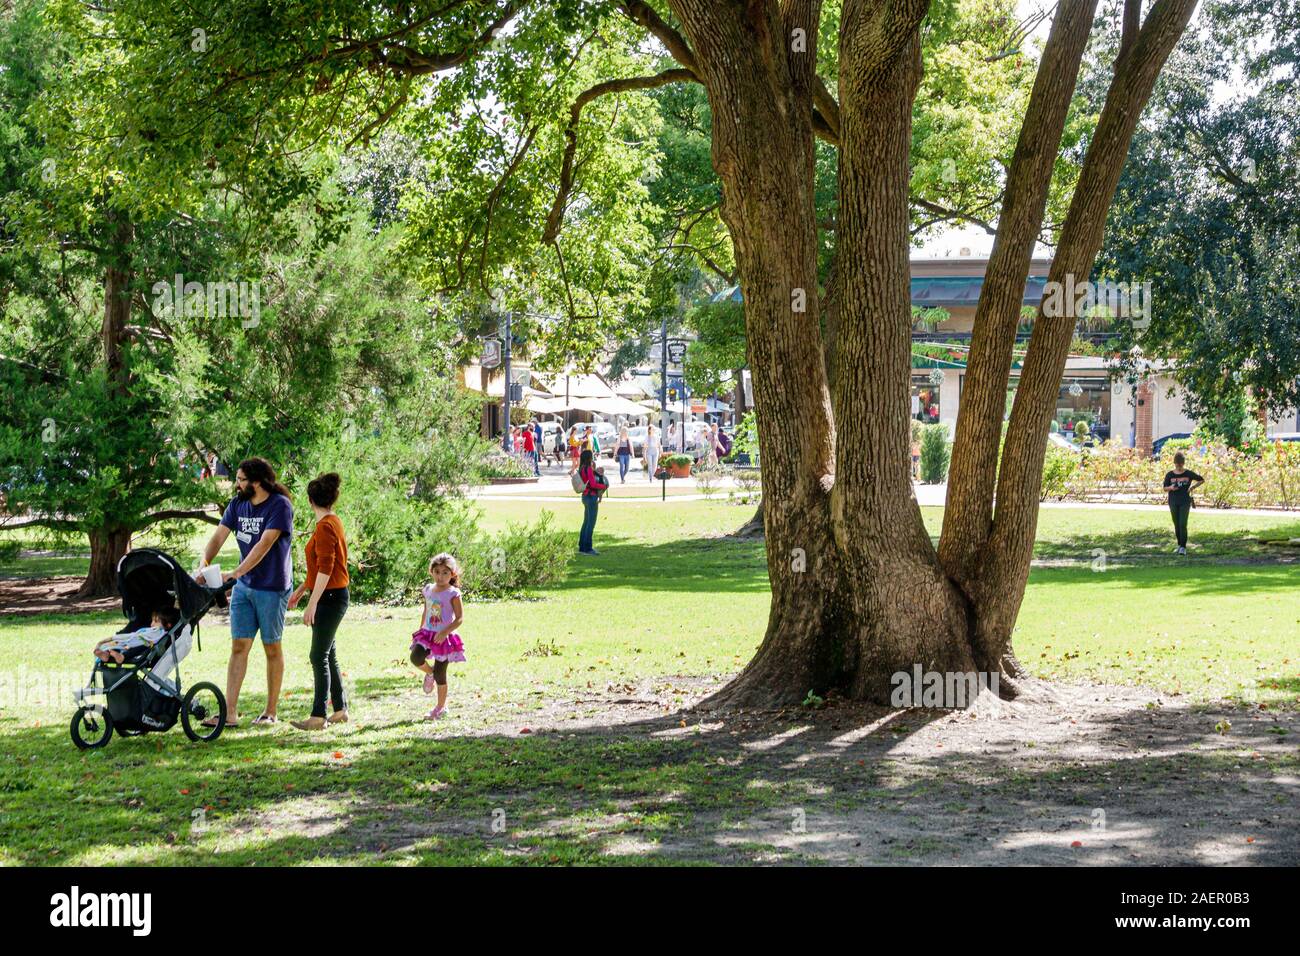 Orlando Winter Park Florida,Downtown,historic district,Central Park,public urban green space,lawn,trees,shade,man,woman,girl,baby,stroller,family,walk Stock Photo